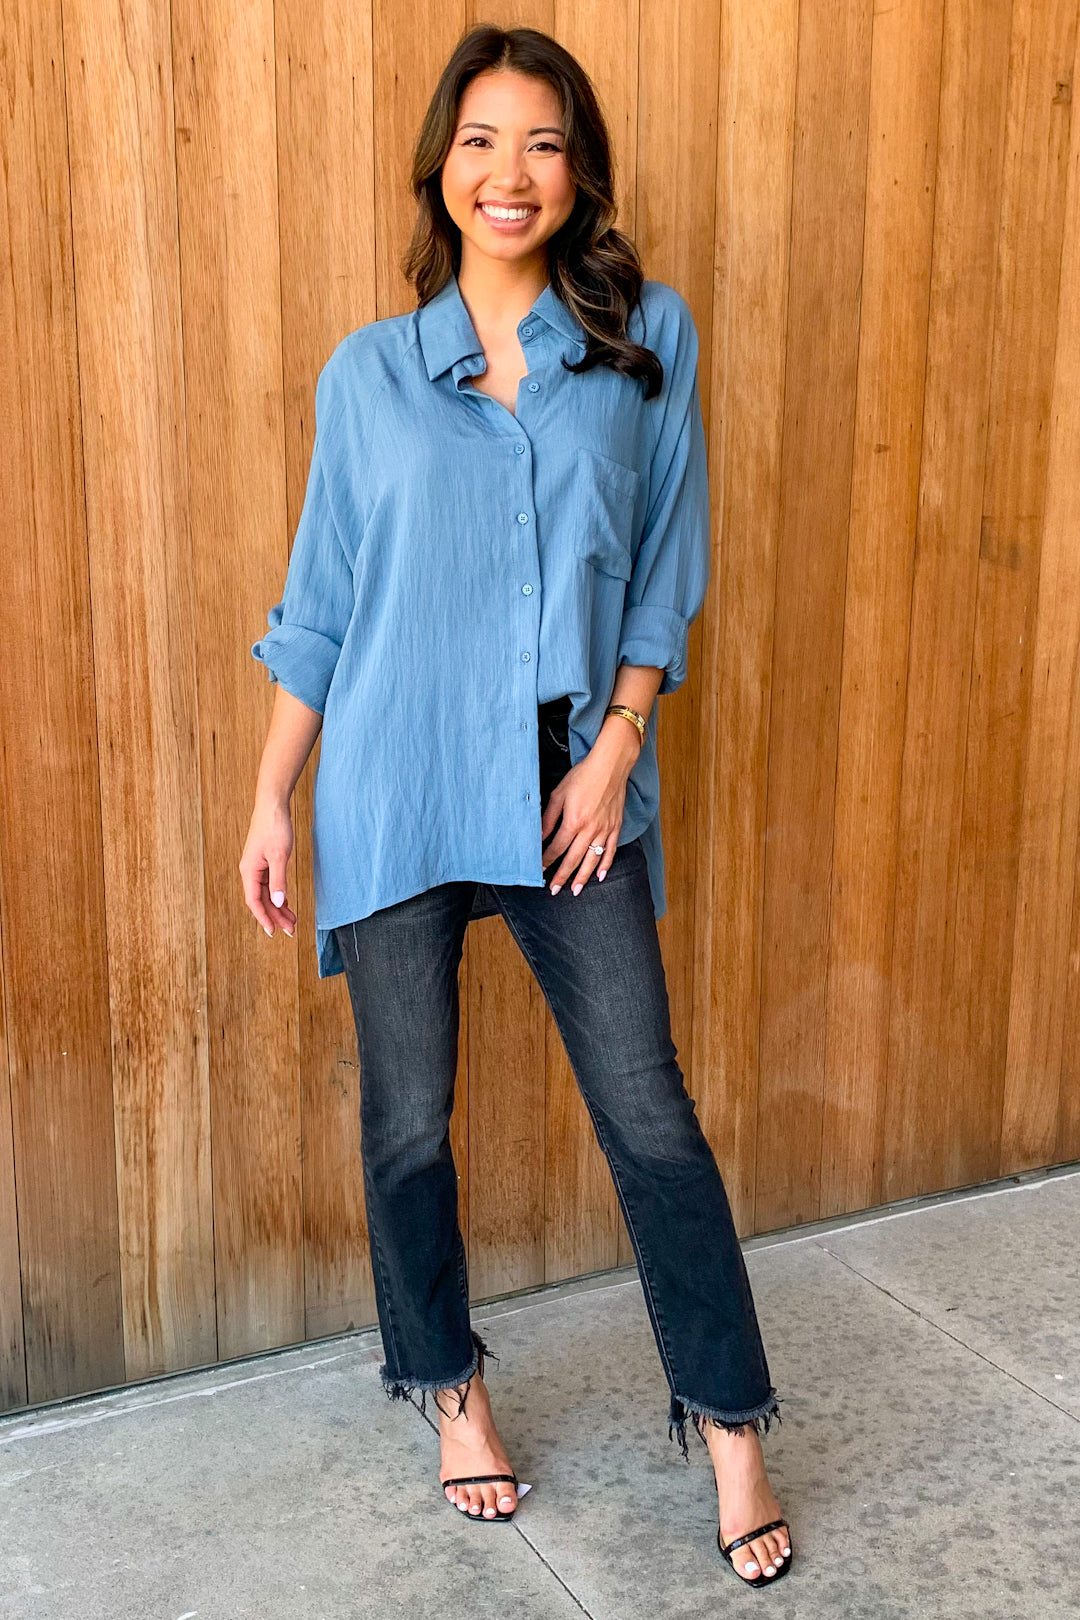 Basic Beach Washed Teal Button Down Top